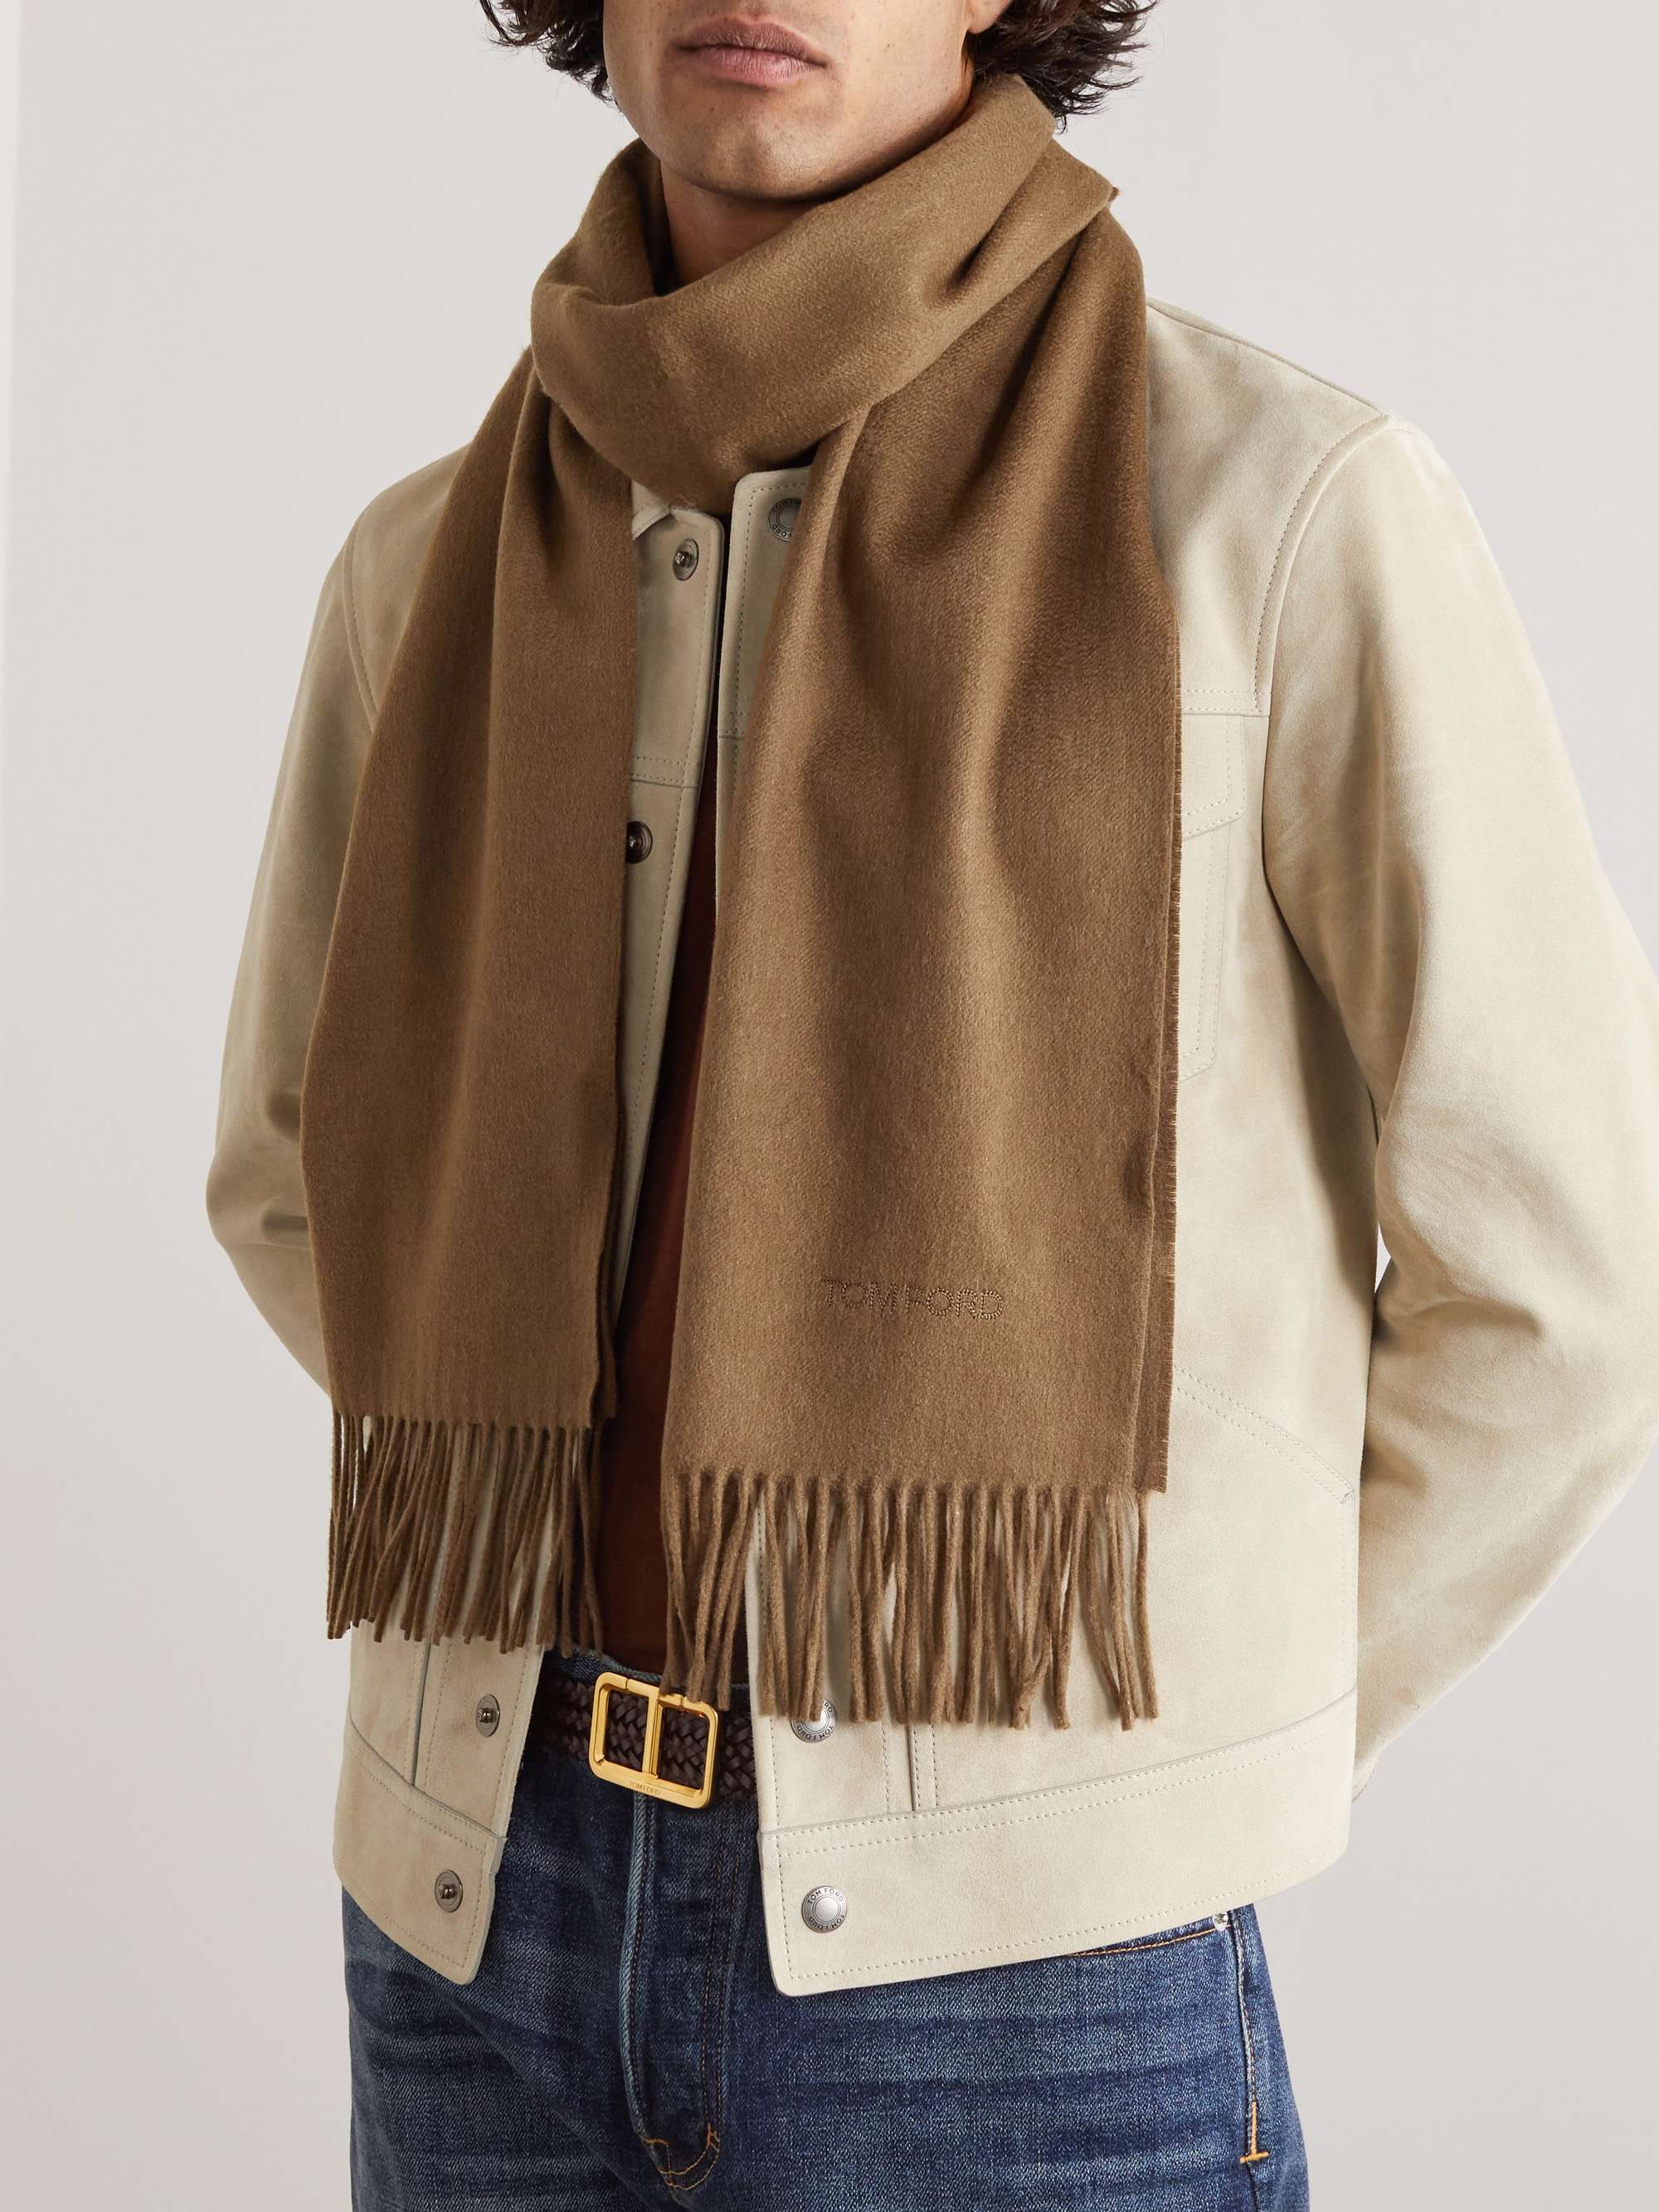 TOM FORD Logo-Embroidered Fringed Cashmere Scarf